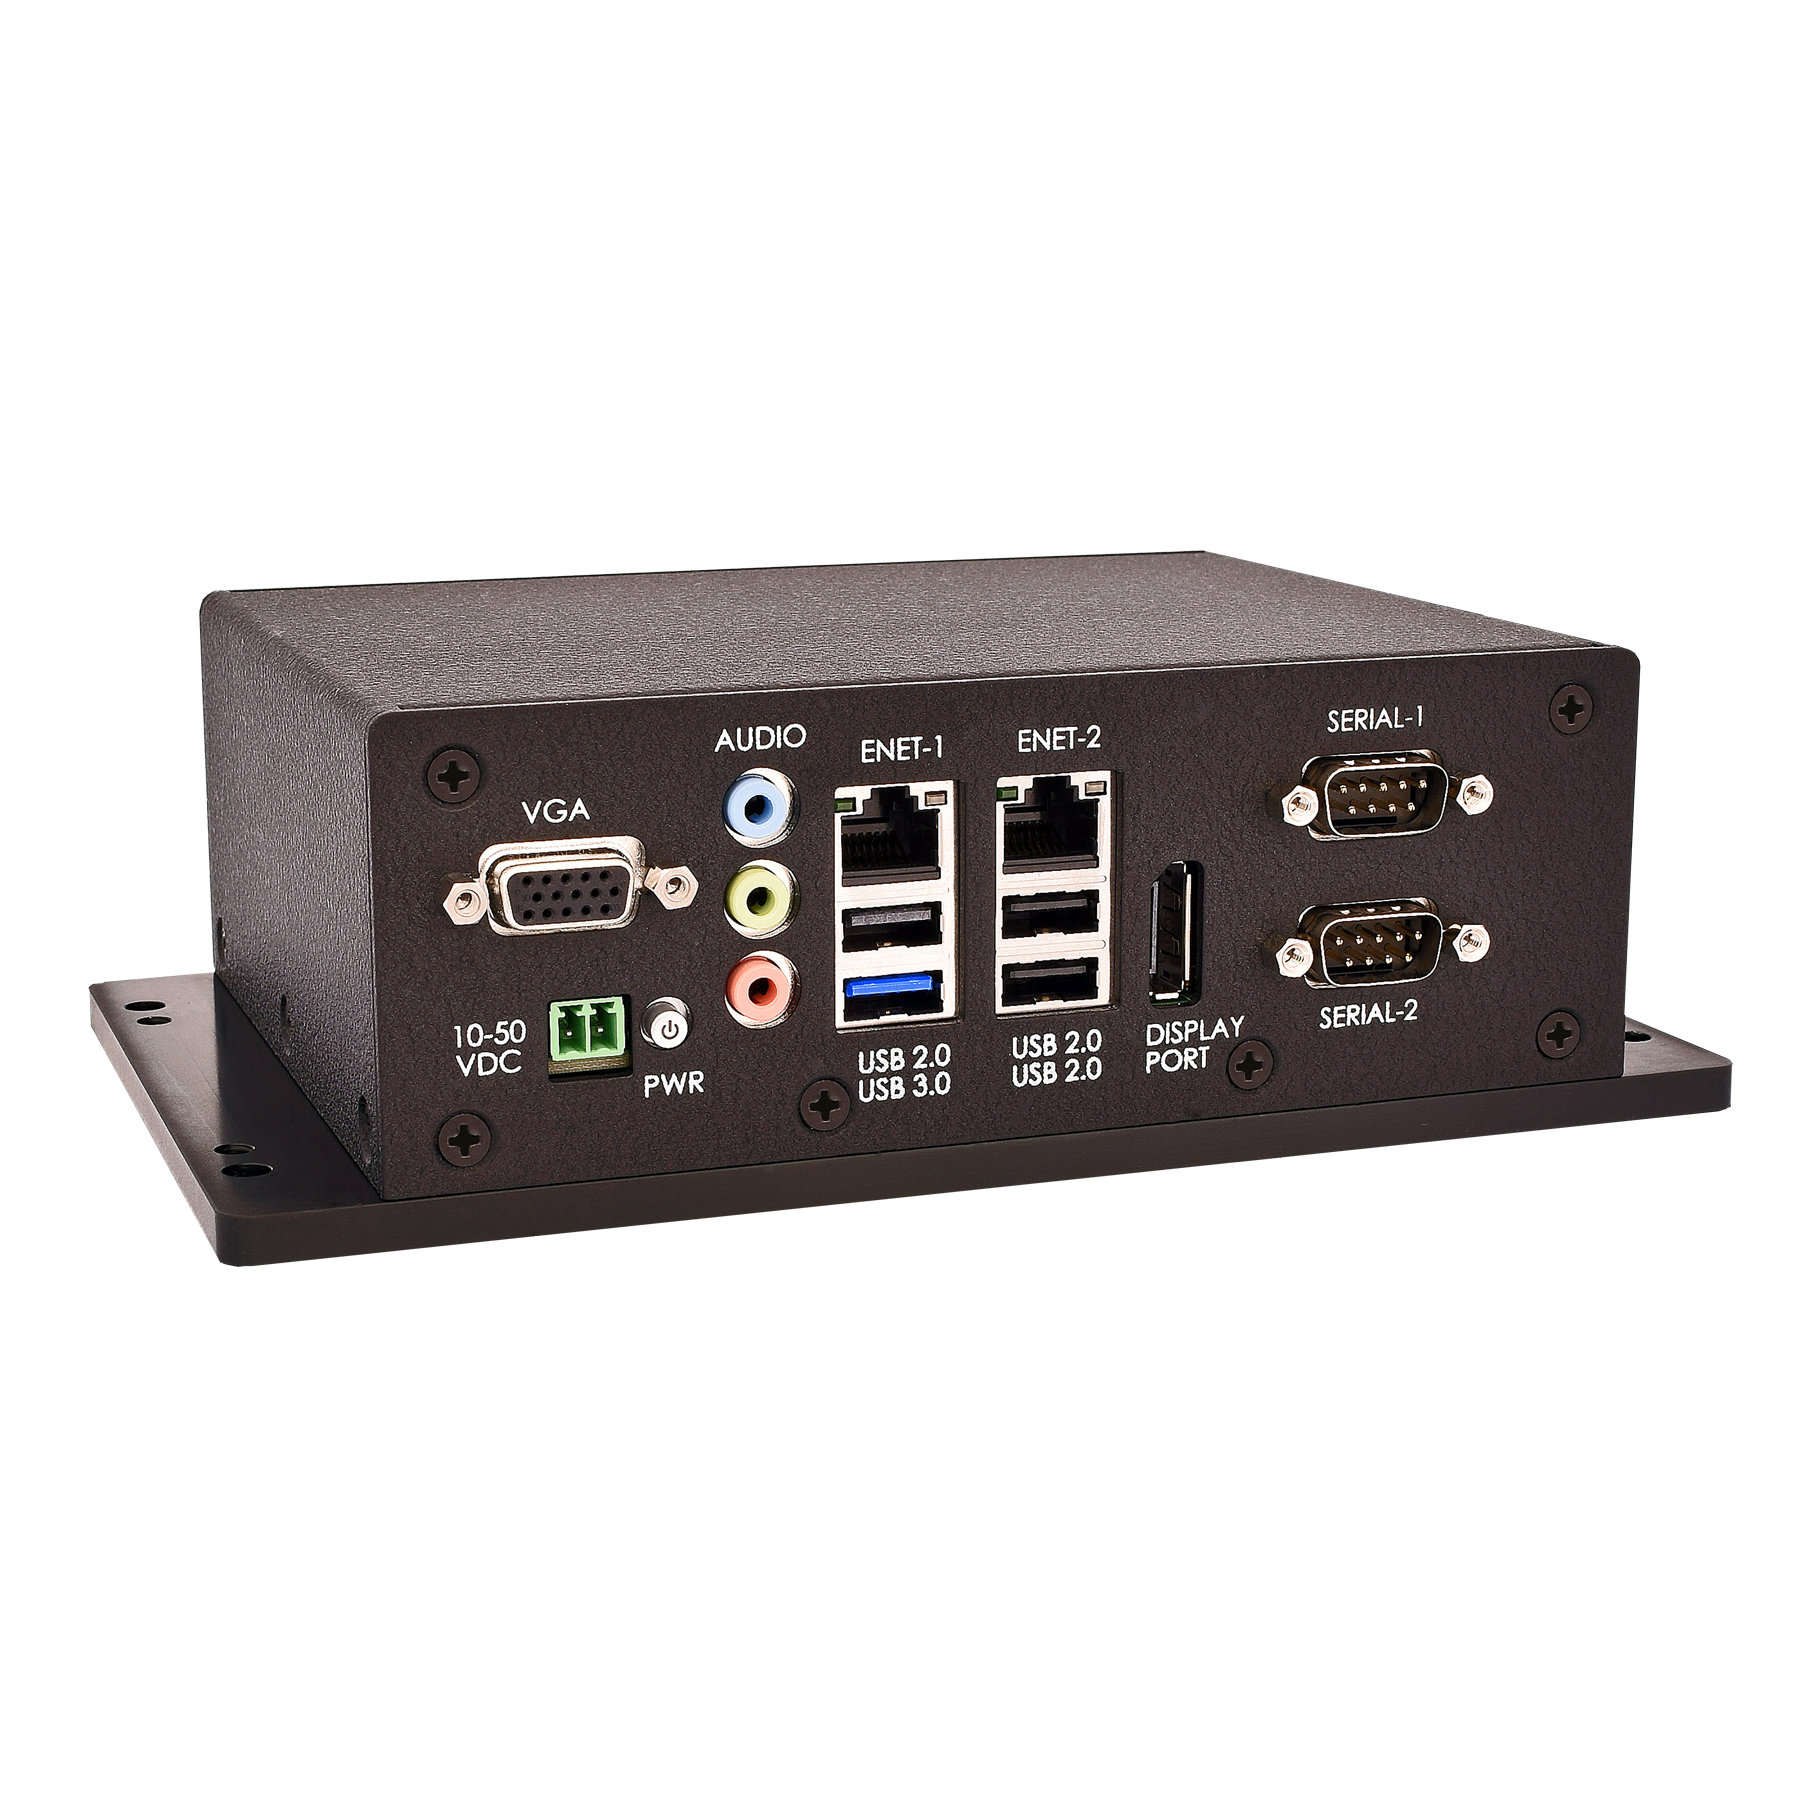 Embedded industrial computer with Intel Atom E3800 series Quad-Core processor and rugged enclosure